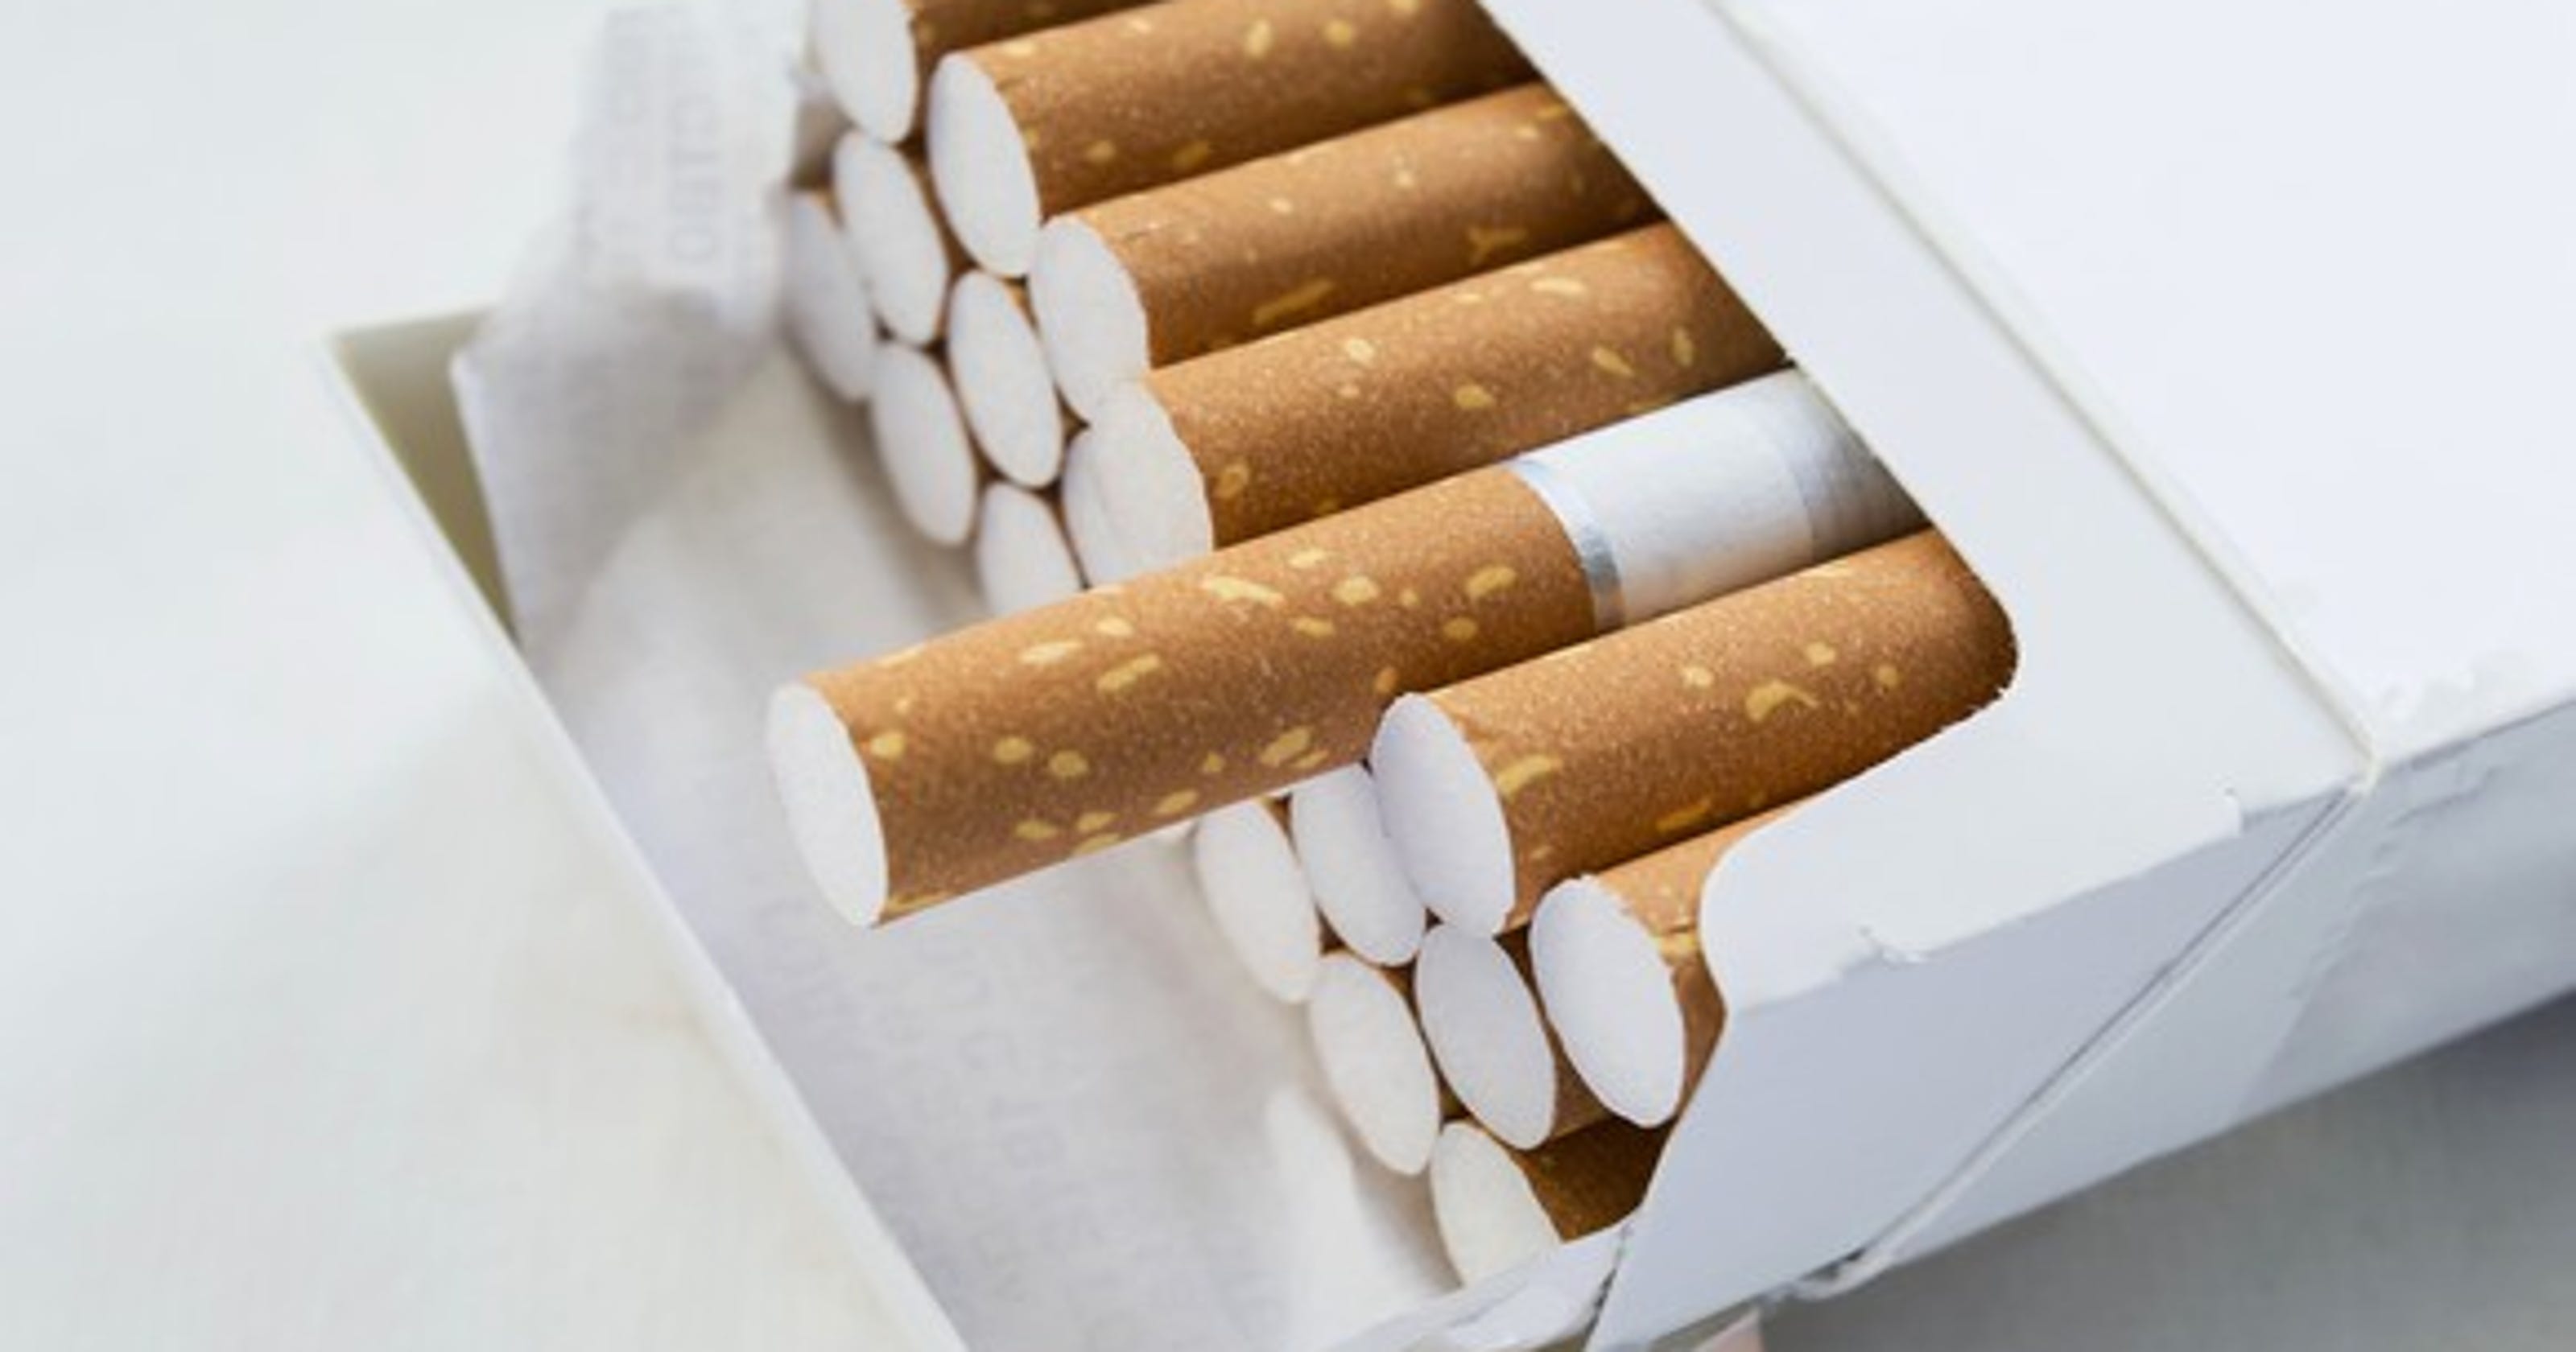 NYC hikes price of pack of cigarettes to 13, highest in U.S.